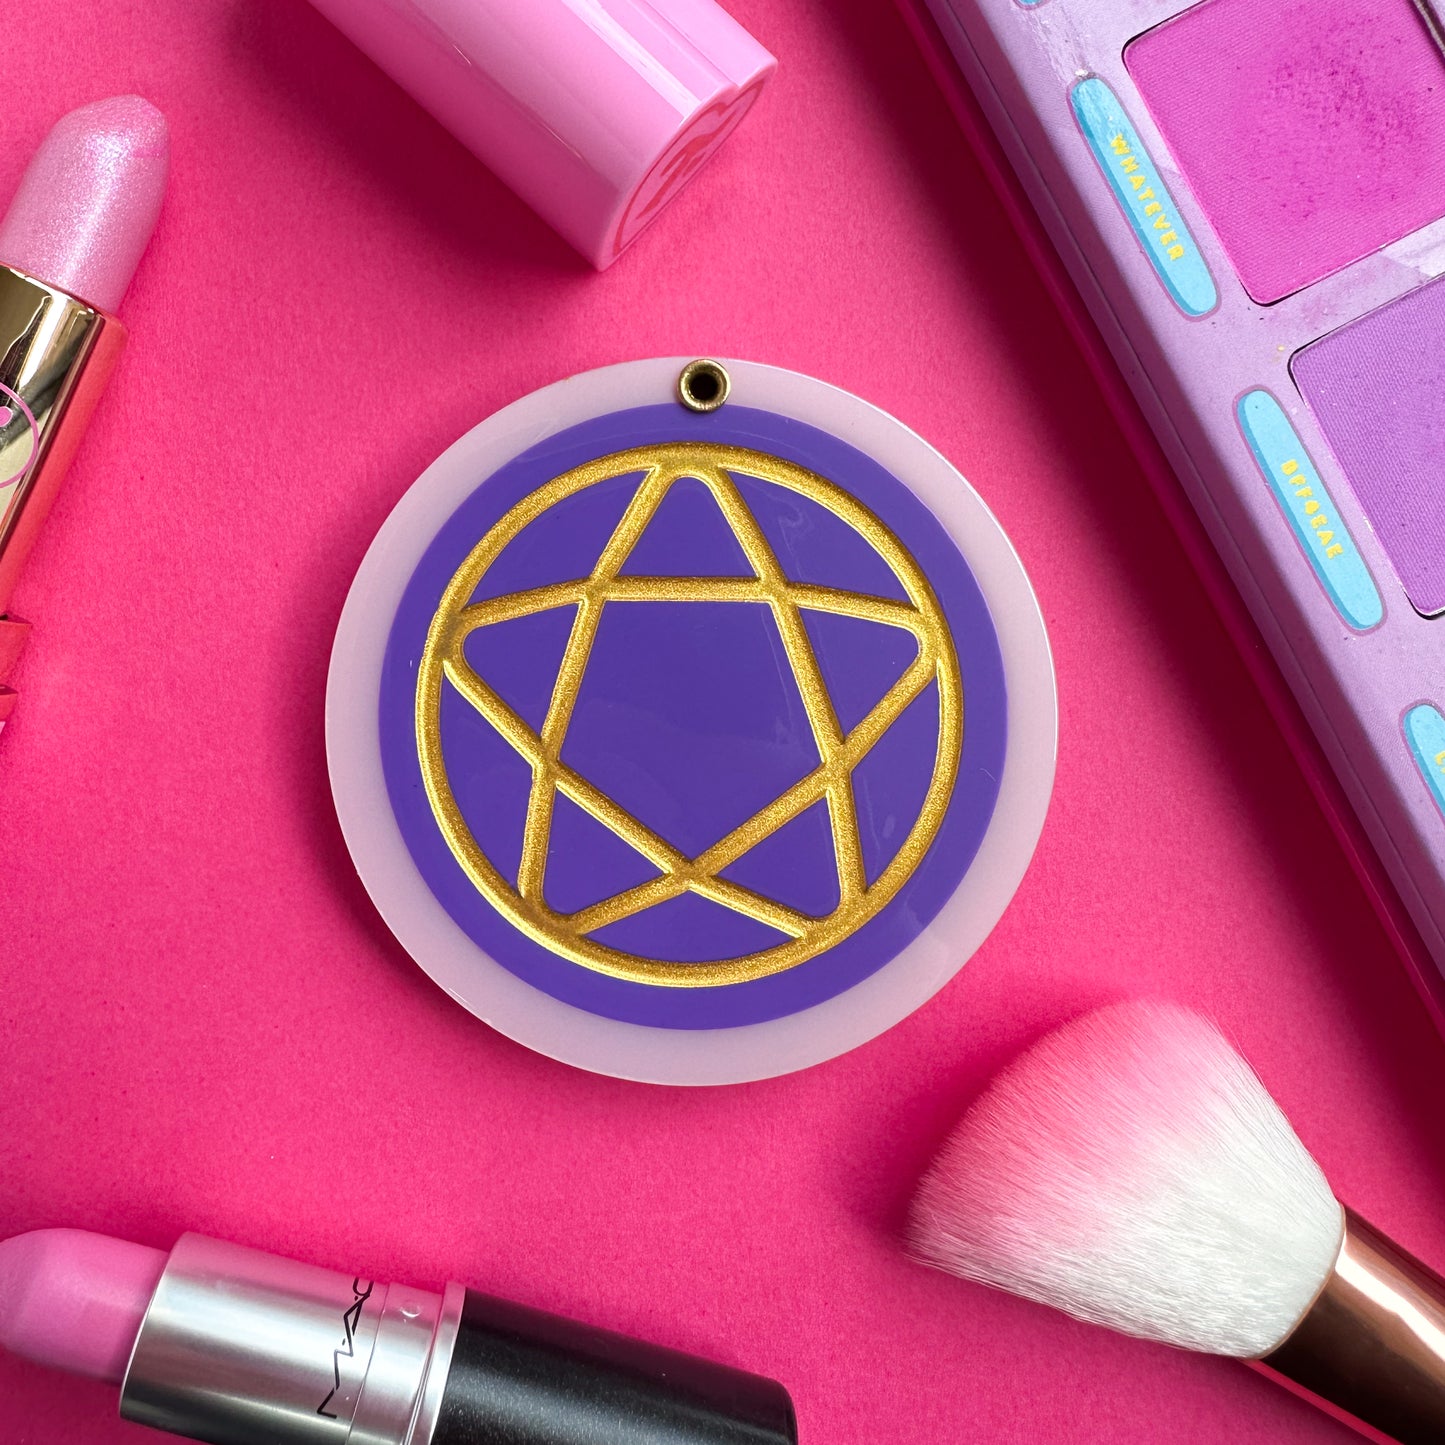 An acetate circle that is purple with a pastel pink border with an embossed gold pentacle on it. This item is on a hot pink background surrounded by some makeup